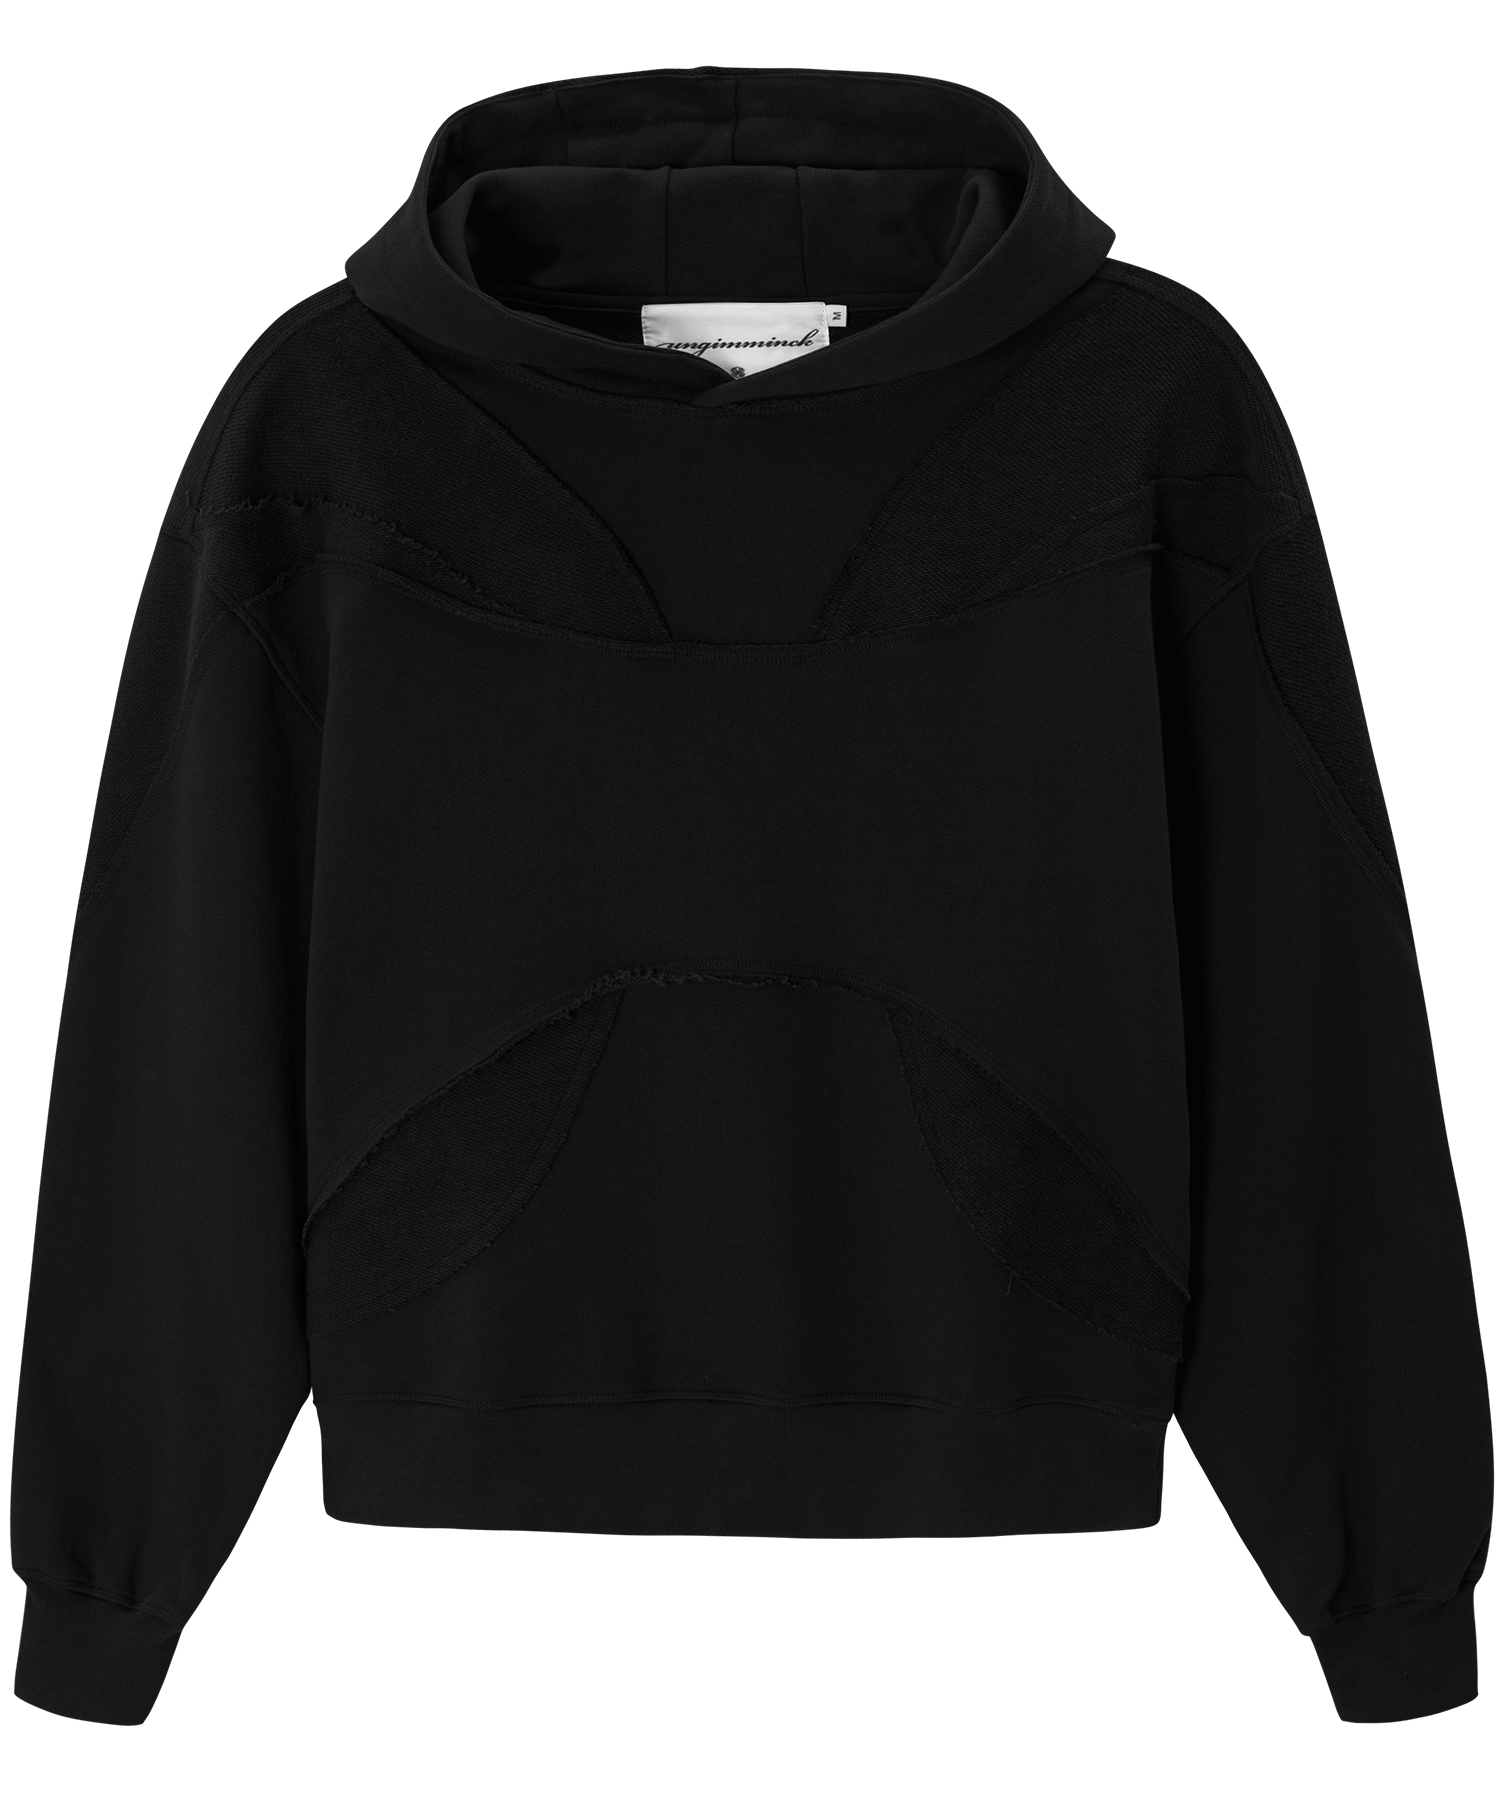 Flipped Fabric Contras Hoodie - Black